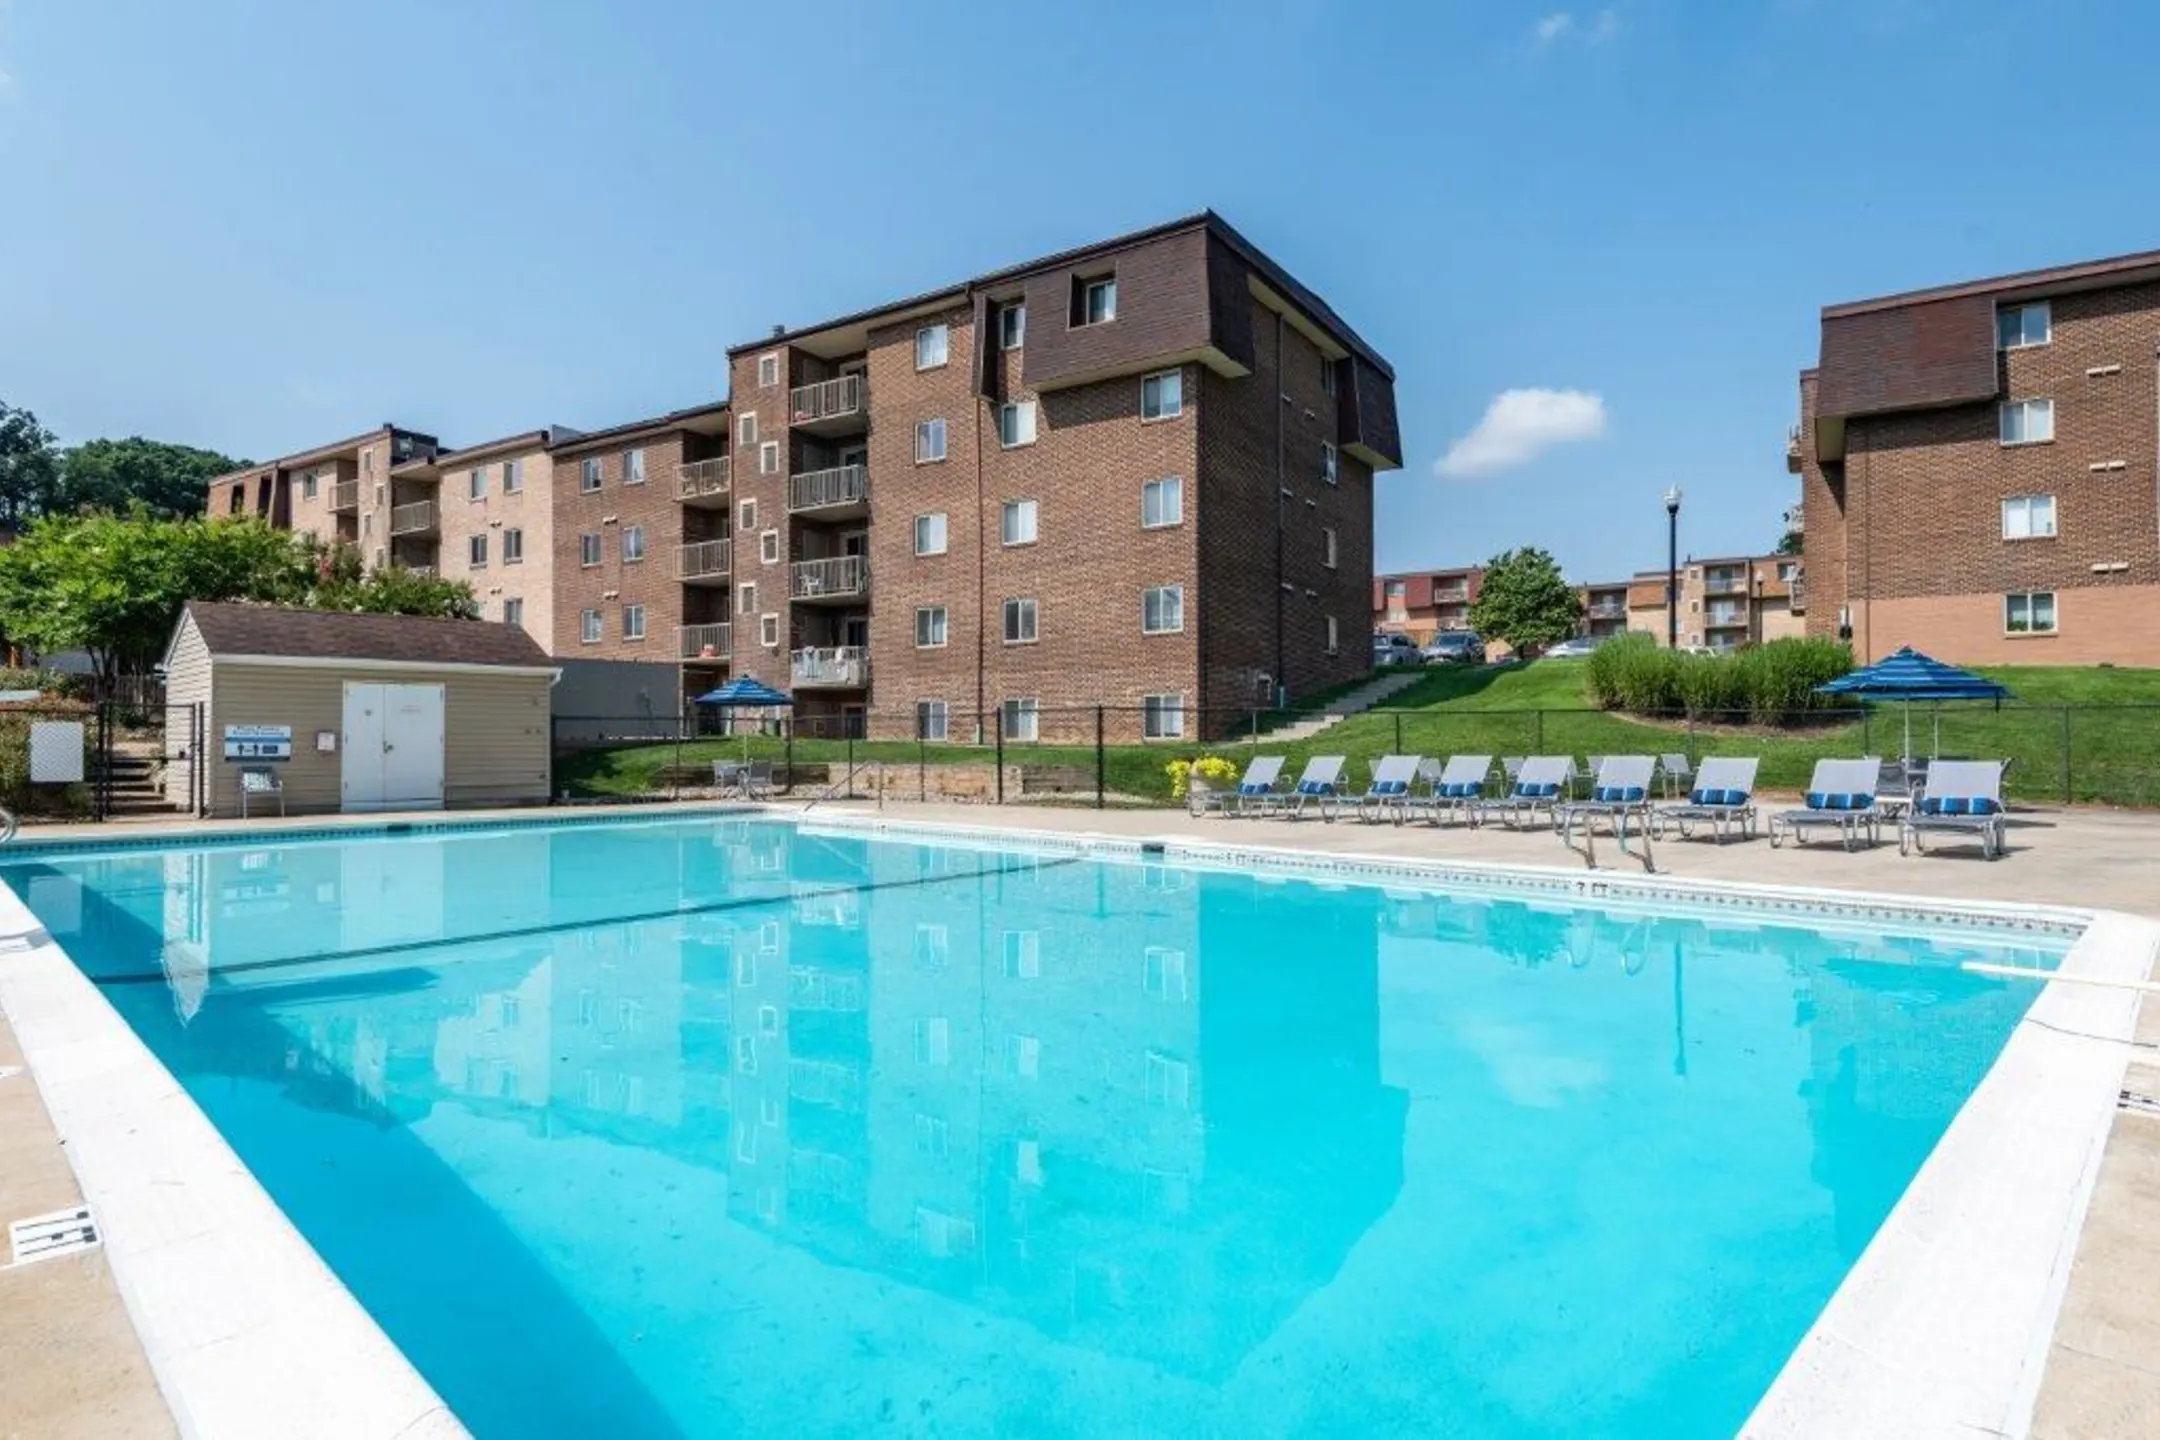 Pool - The Willows Apartment Homes - Glen Burnie, MD